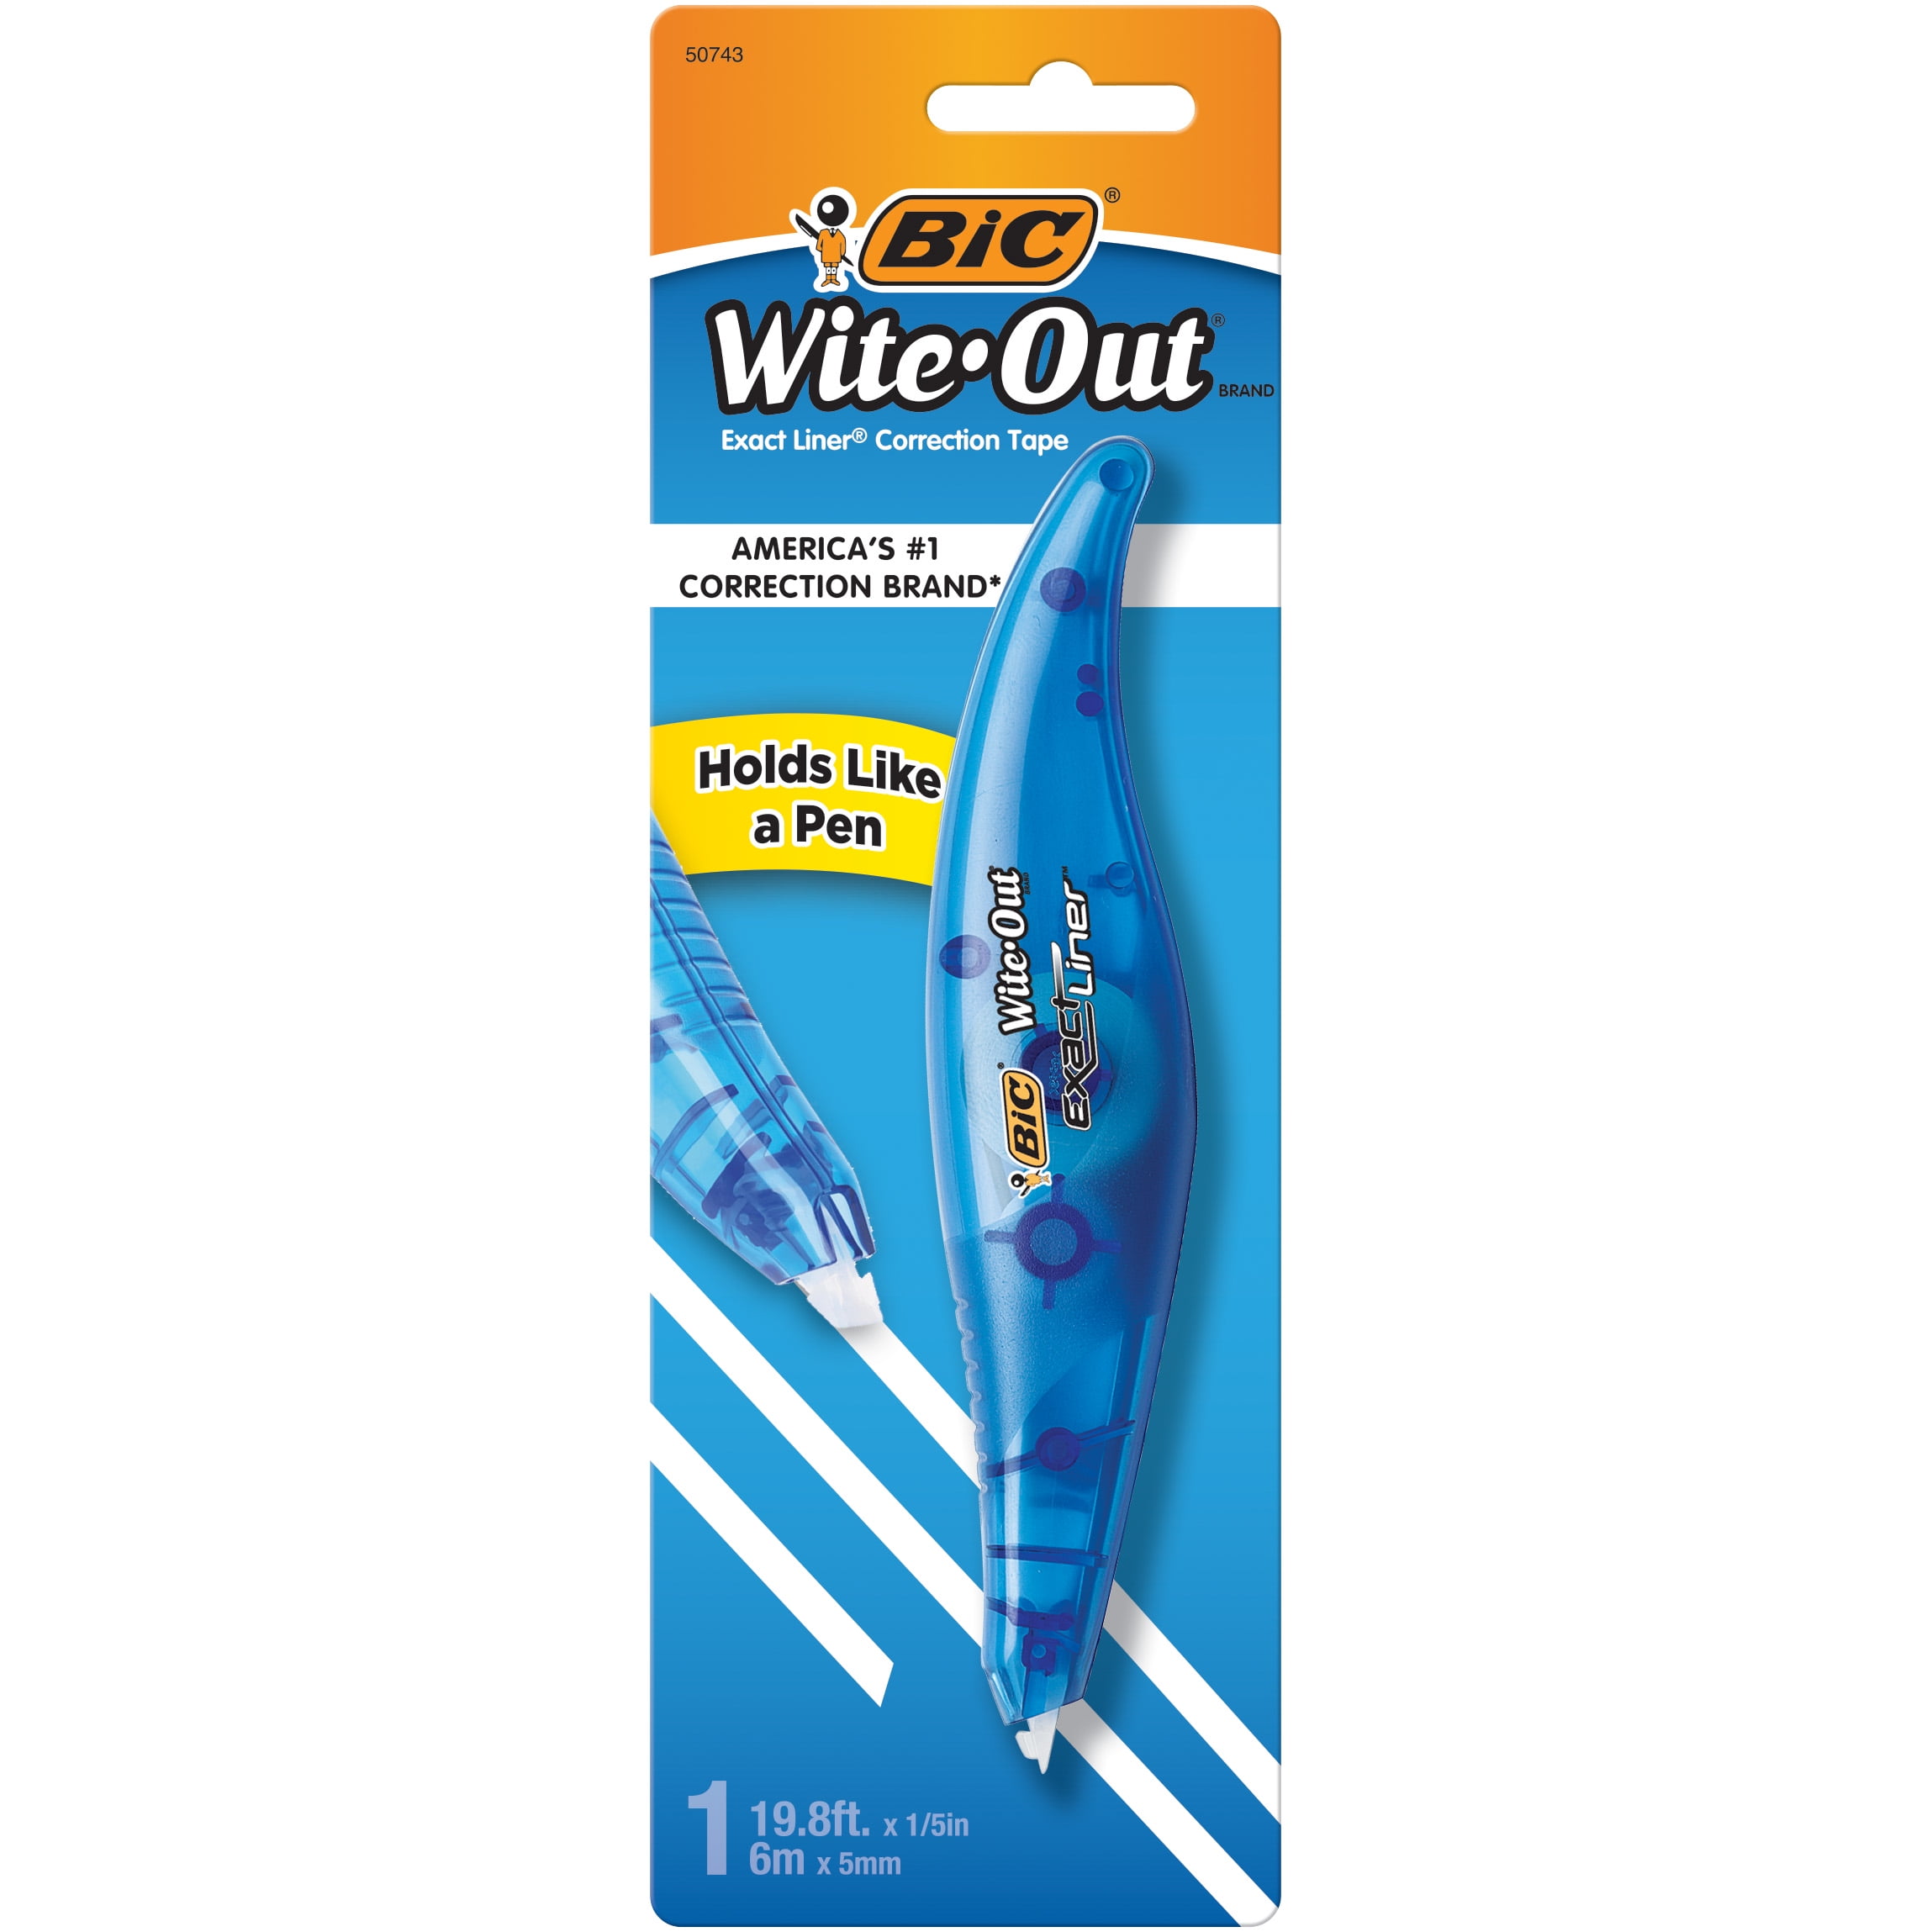 10 Best White Out of 2023 (BIC, Paper Mate, and More)